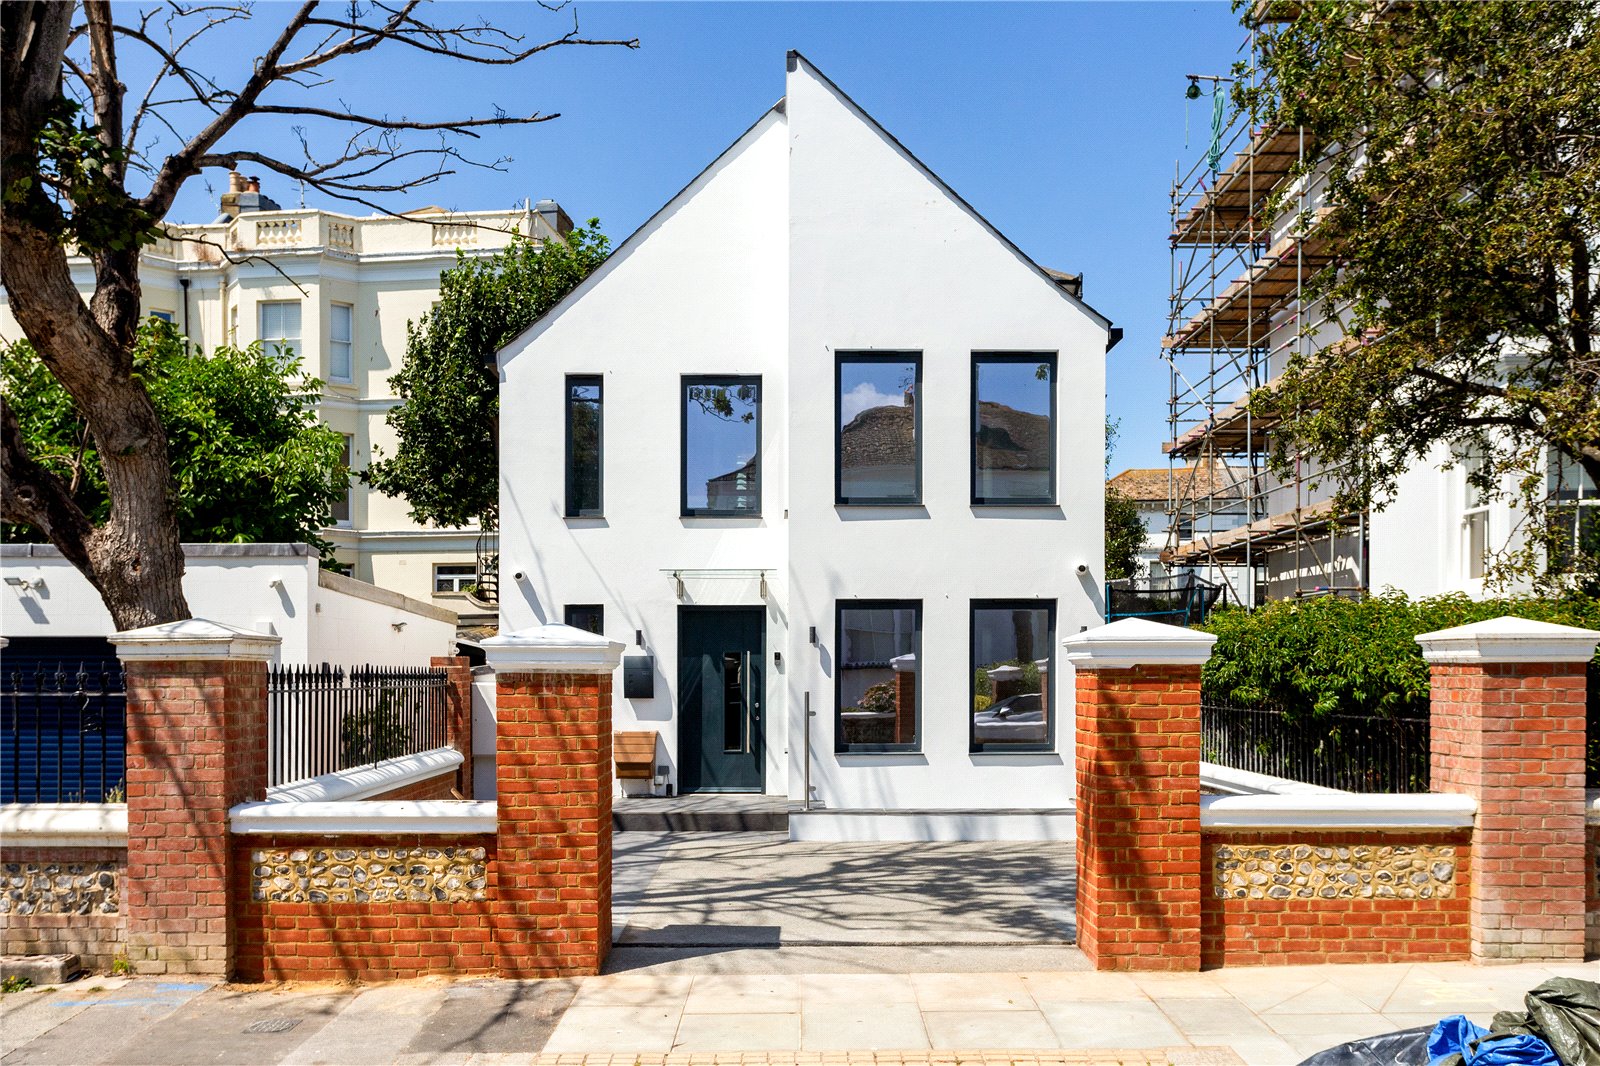 Albany Villas, Hove, East Sussex, BN3